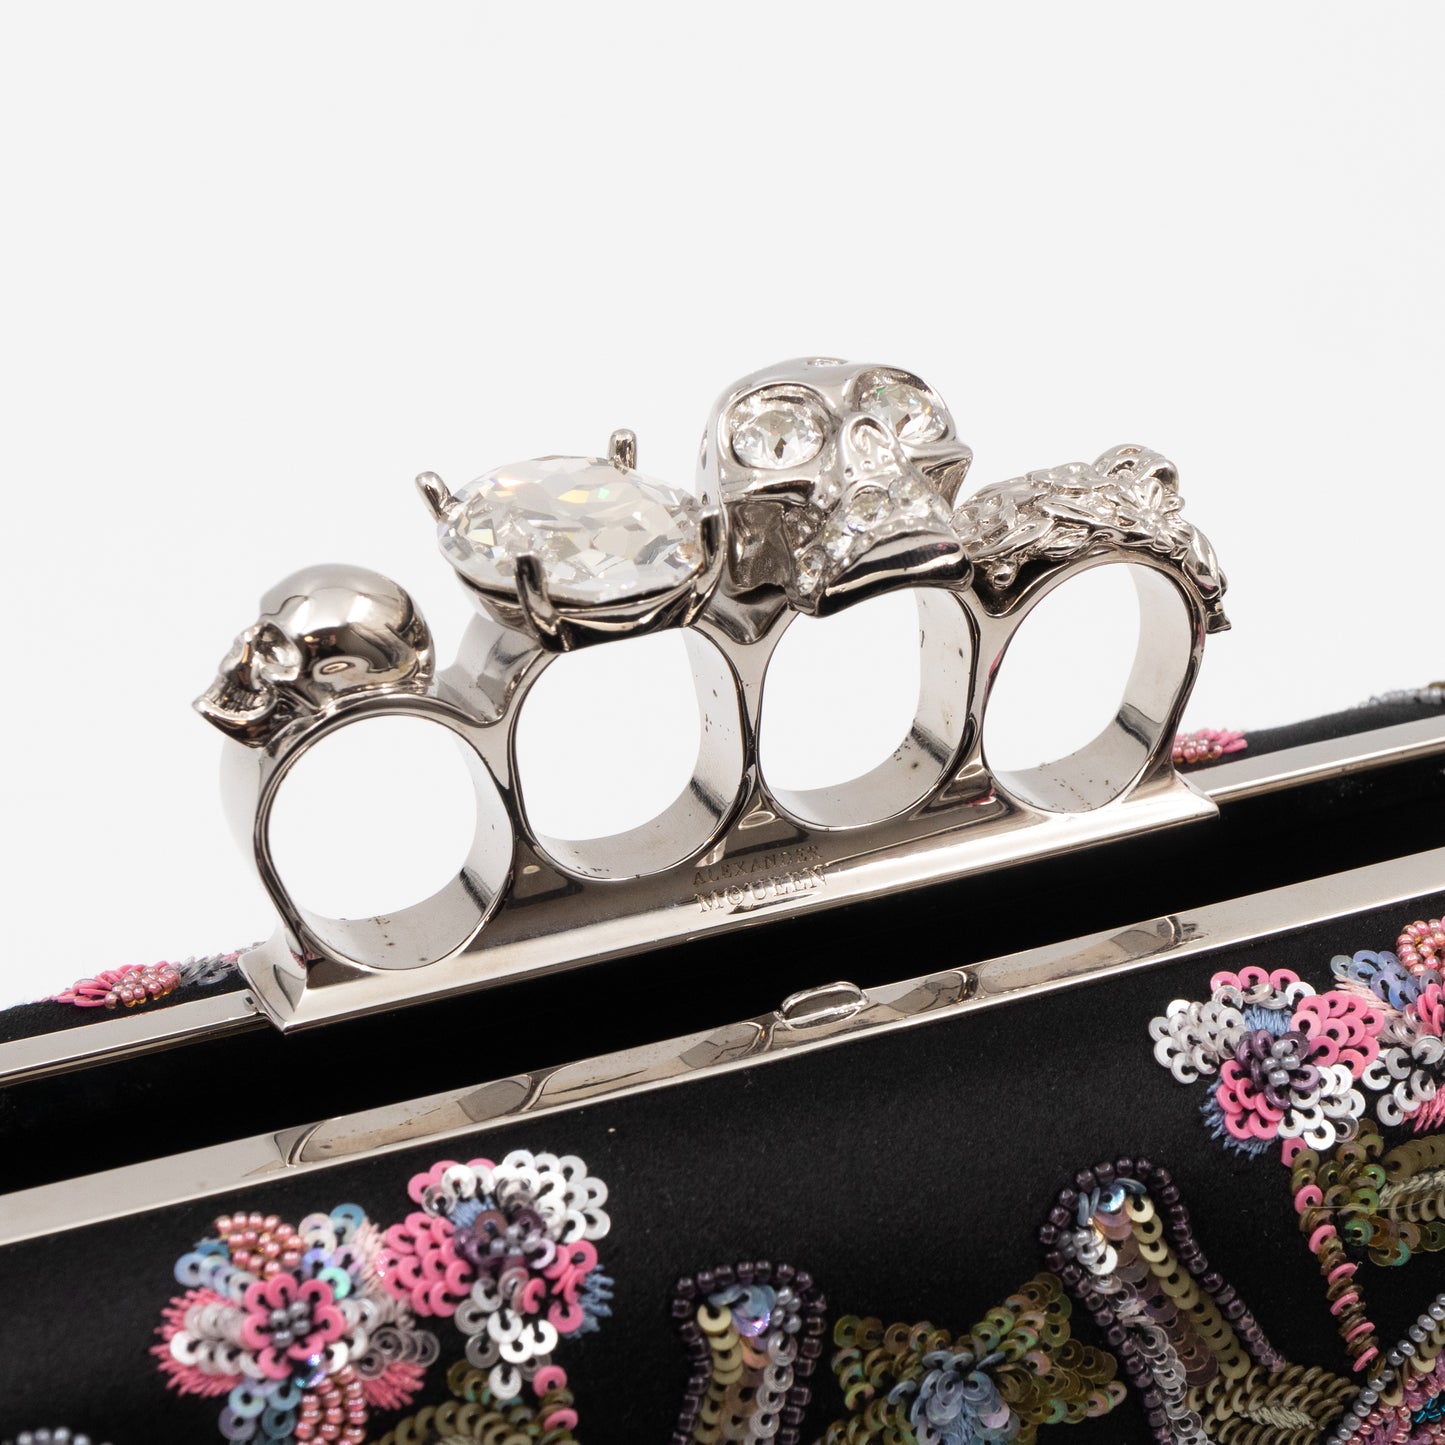 Long Skull Knuckle Clutch Black Silk Floral Embroidery